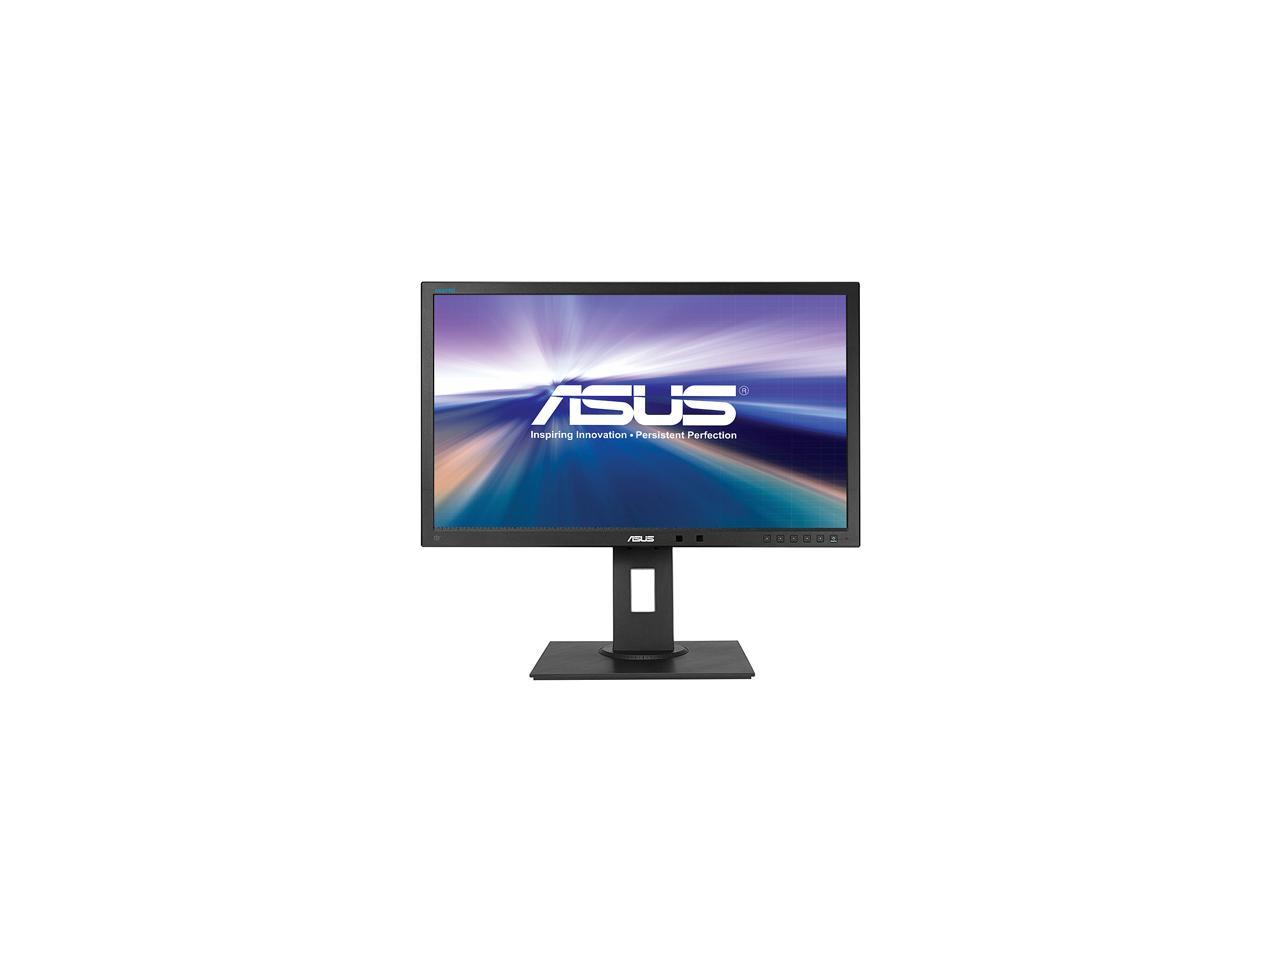 Asus Commercial Series C623AQR 23" Black 1920x1080 IPS LED Backlight LCD Monitor 5ms 250cd/m2, Built-in Speakers, Flick Free Technology, Ergonomic tilt, swivel, pivot and height adjustments